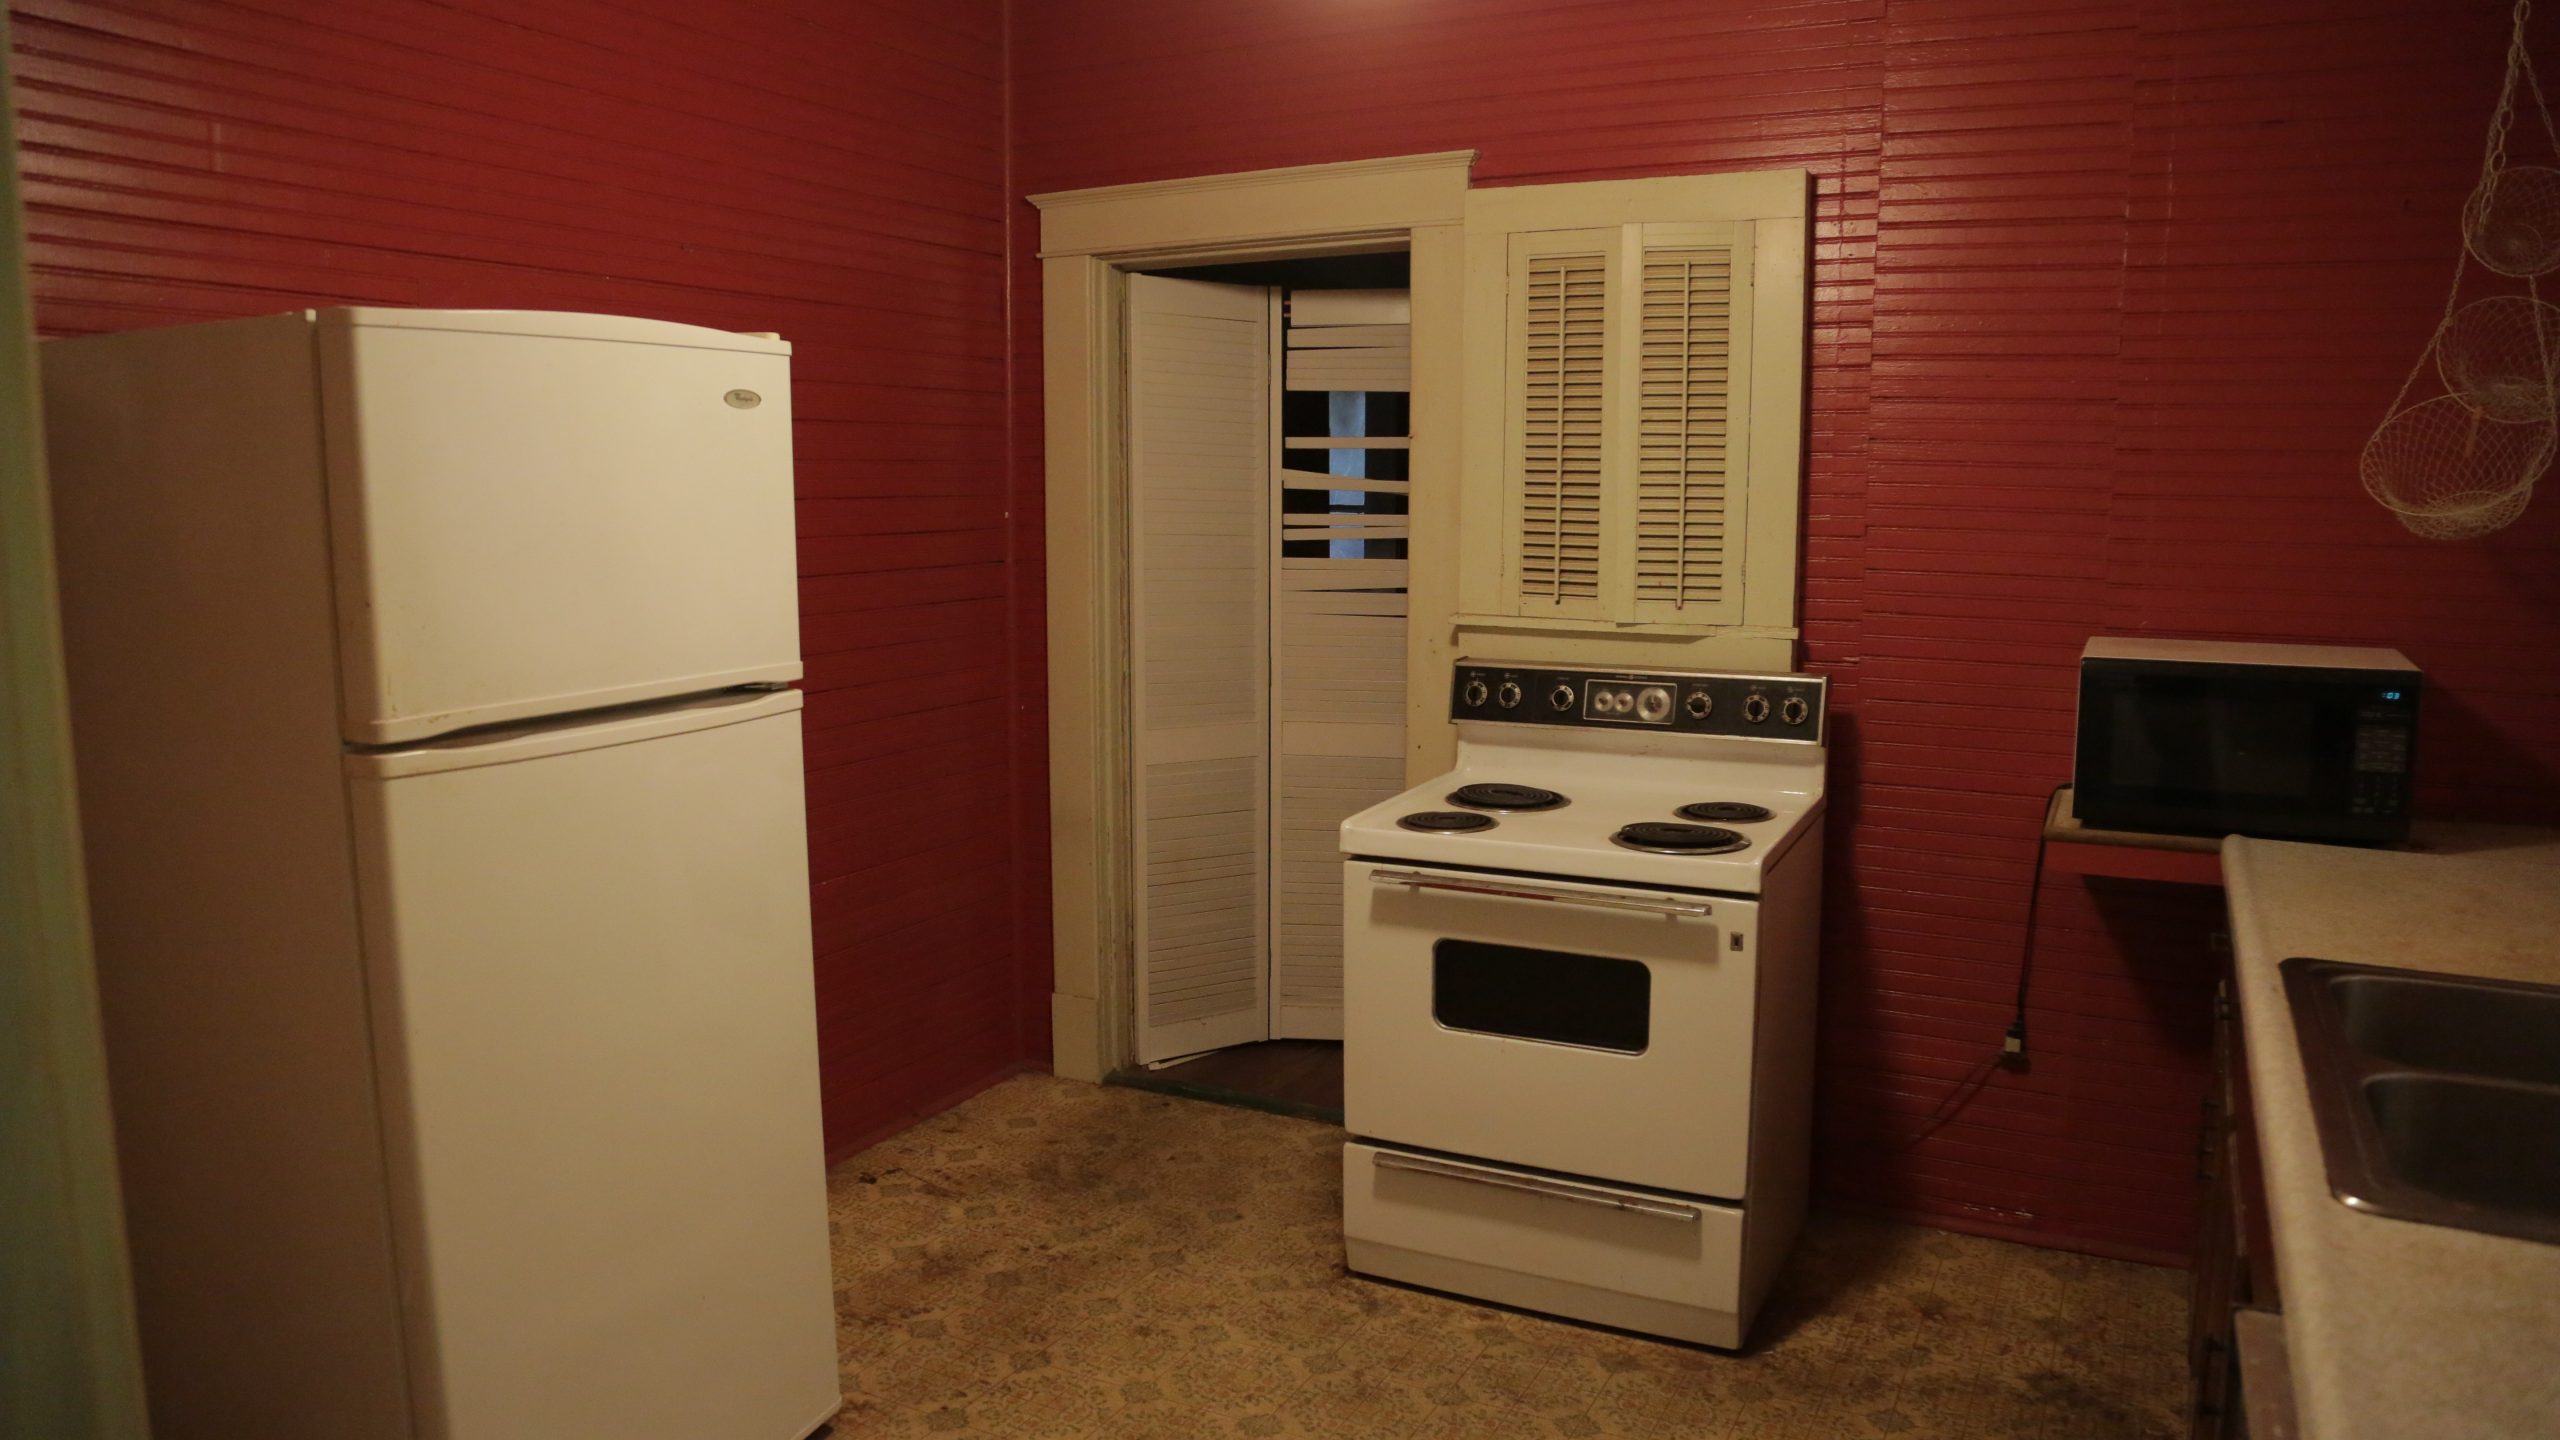 Outdated maroon kitchen